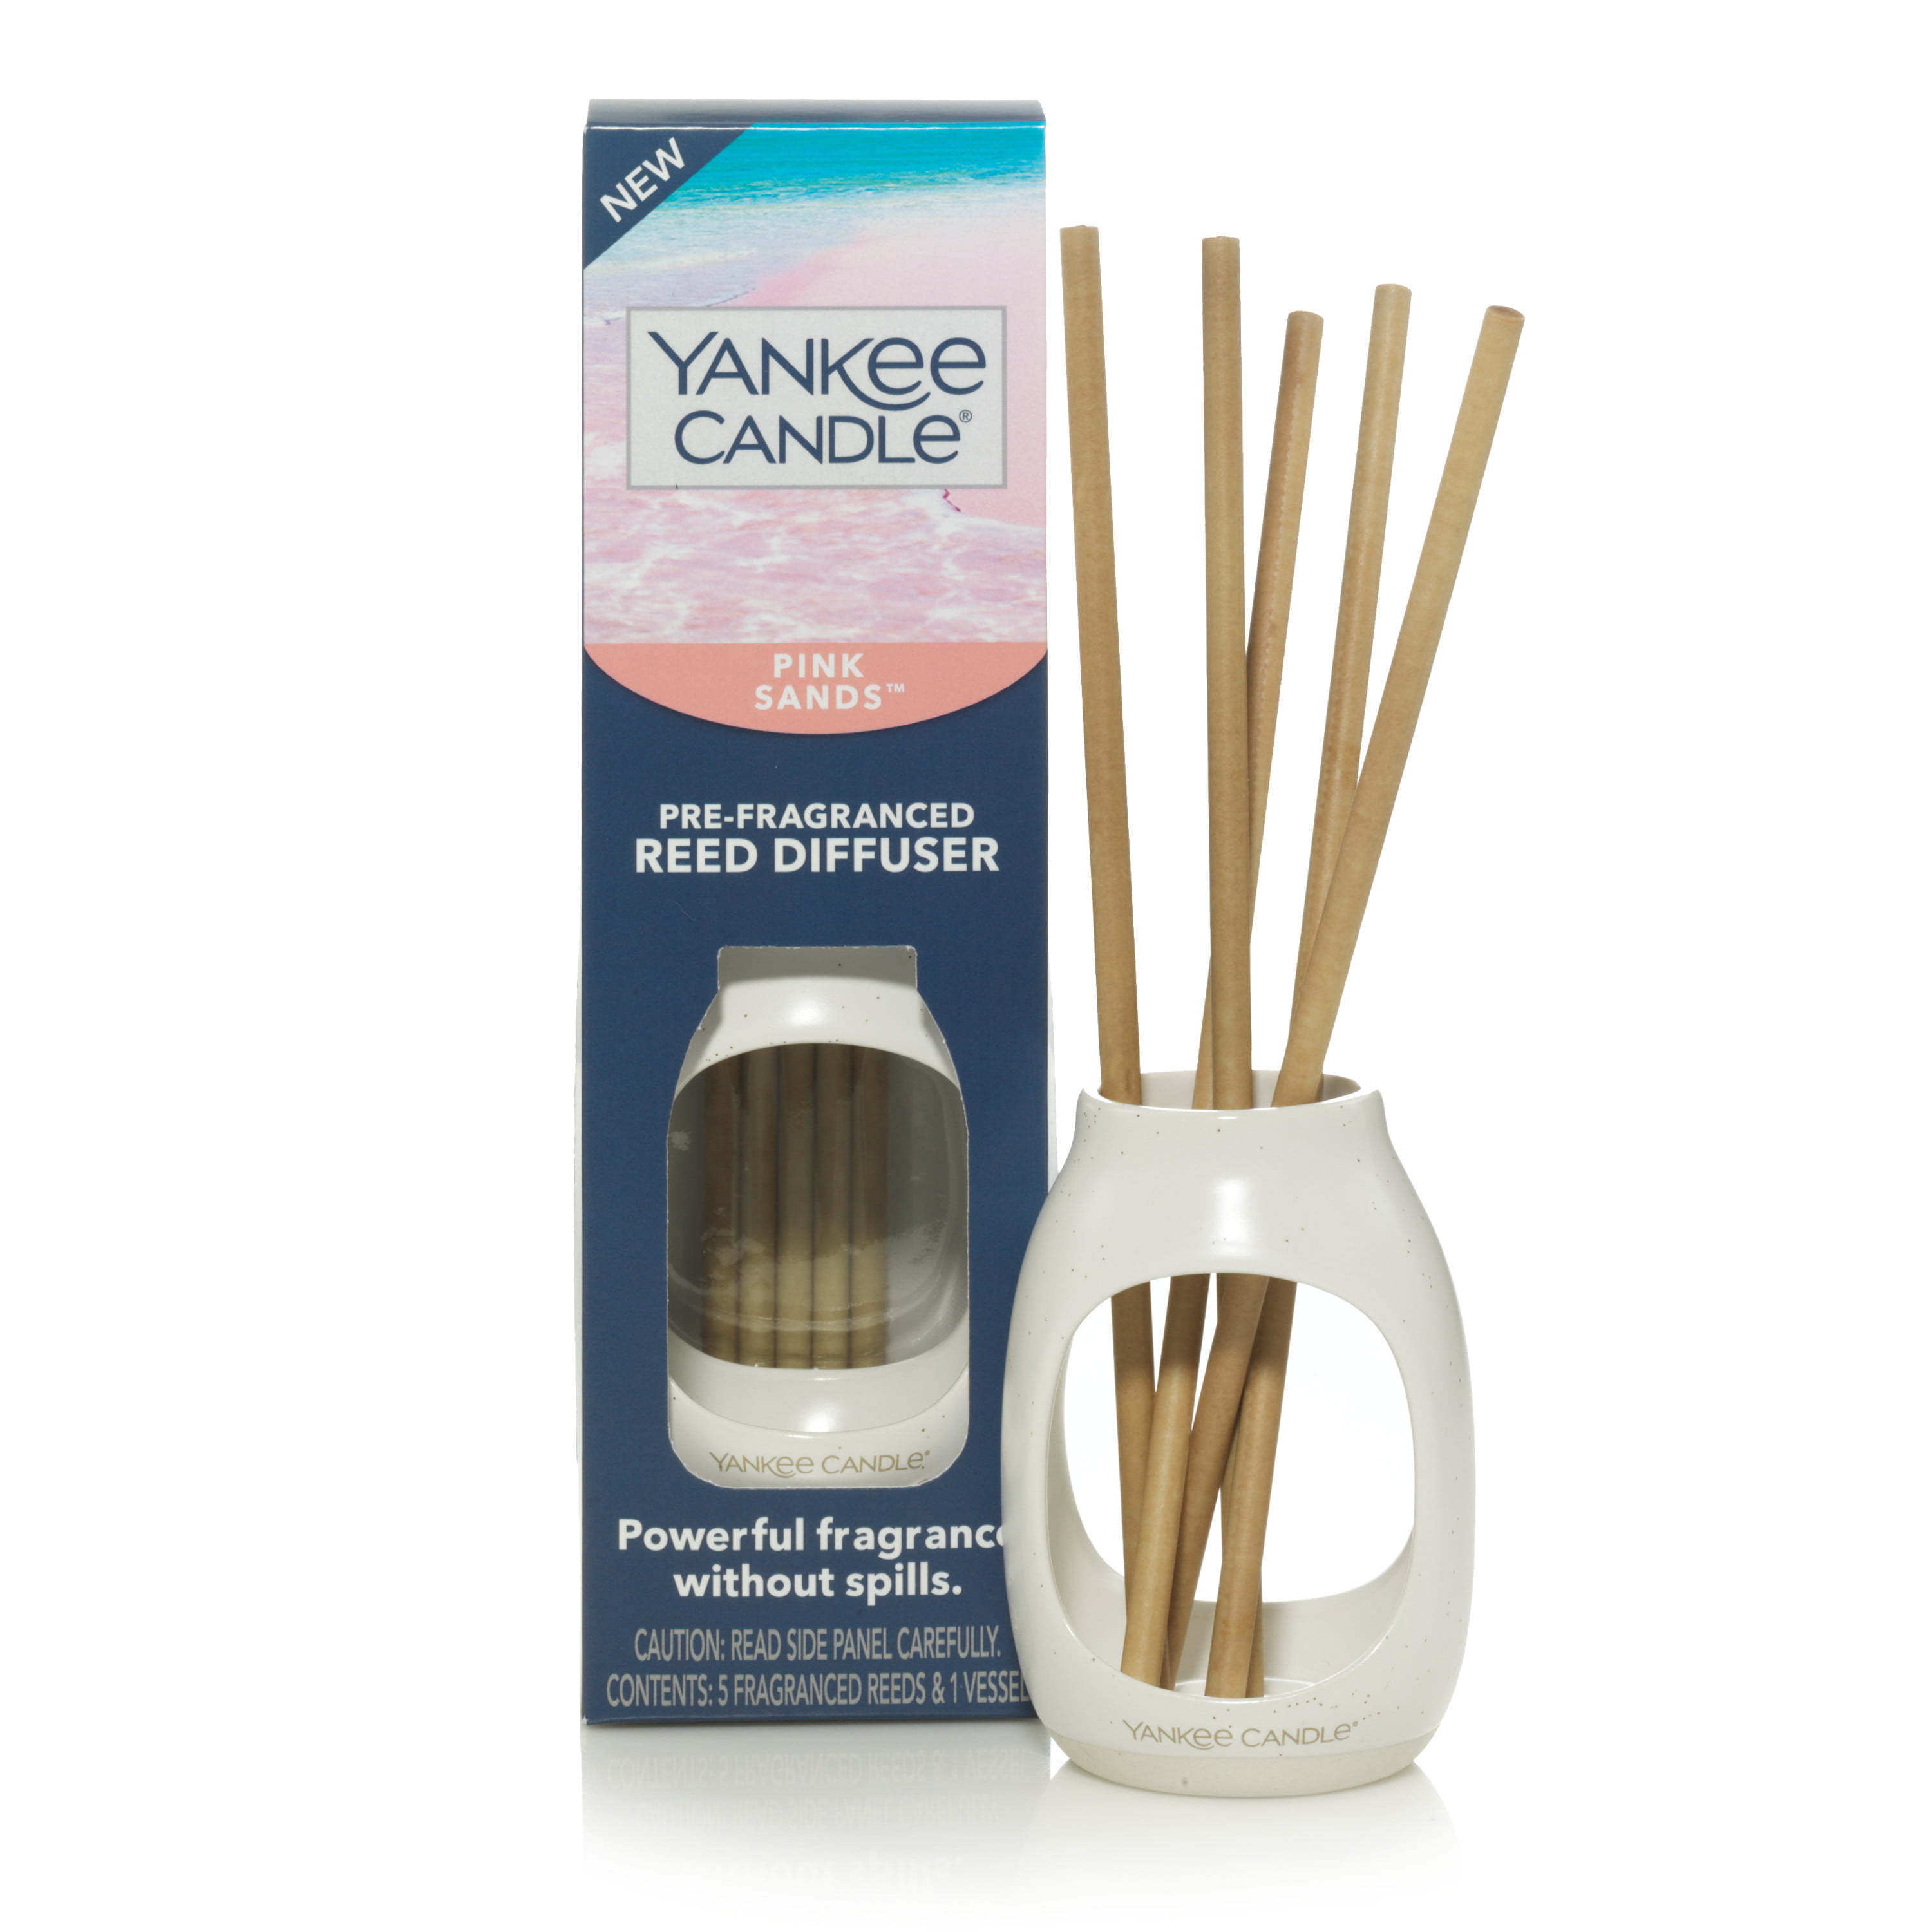 Rathbornes Bitter Orange and Balsam Scented Reed Diffuser 200 ml 